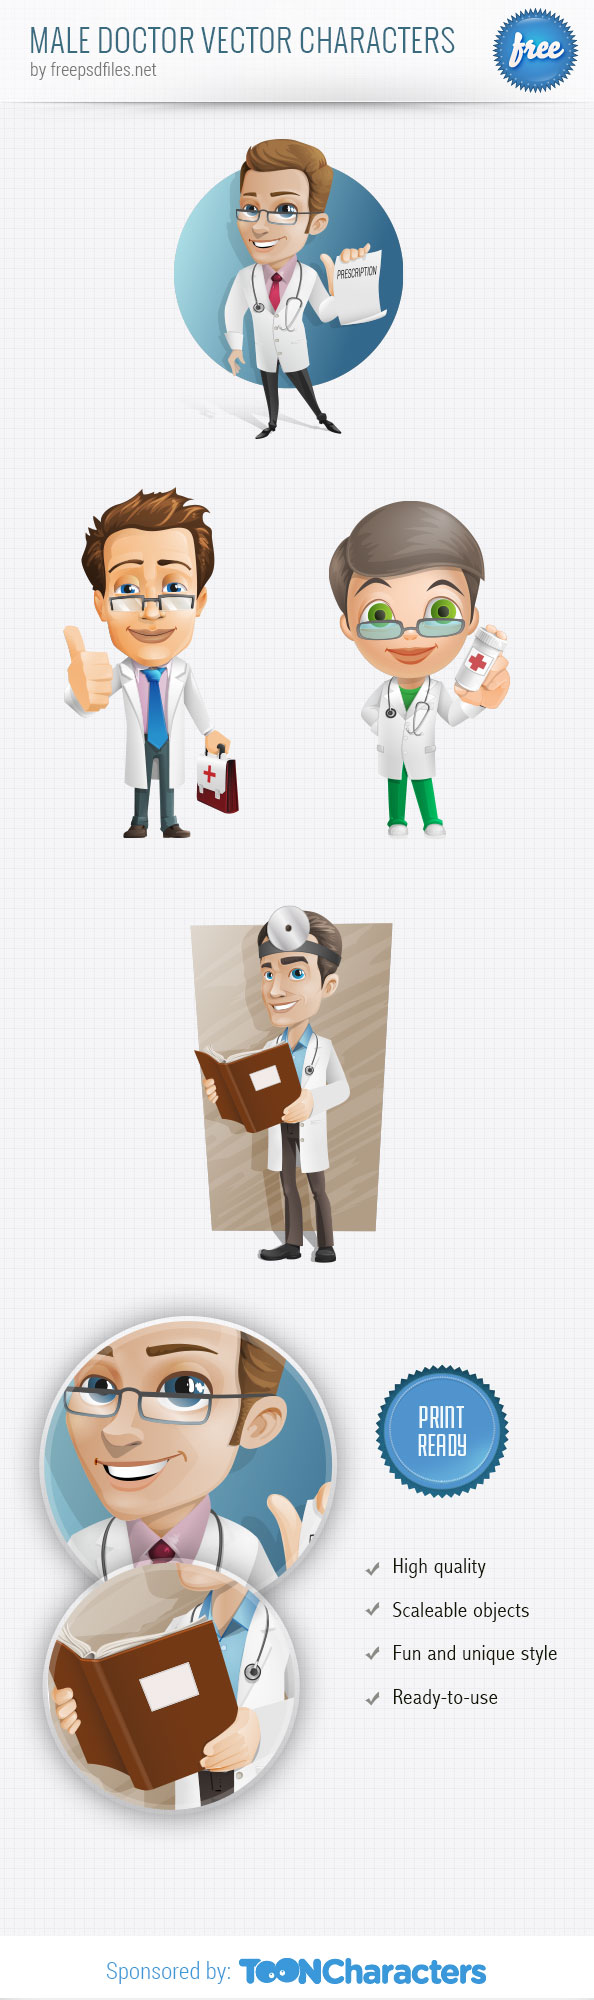 Male Doctor Vector Characters Set